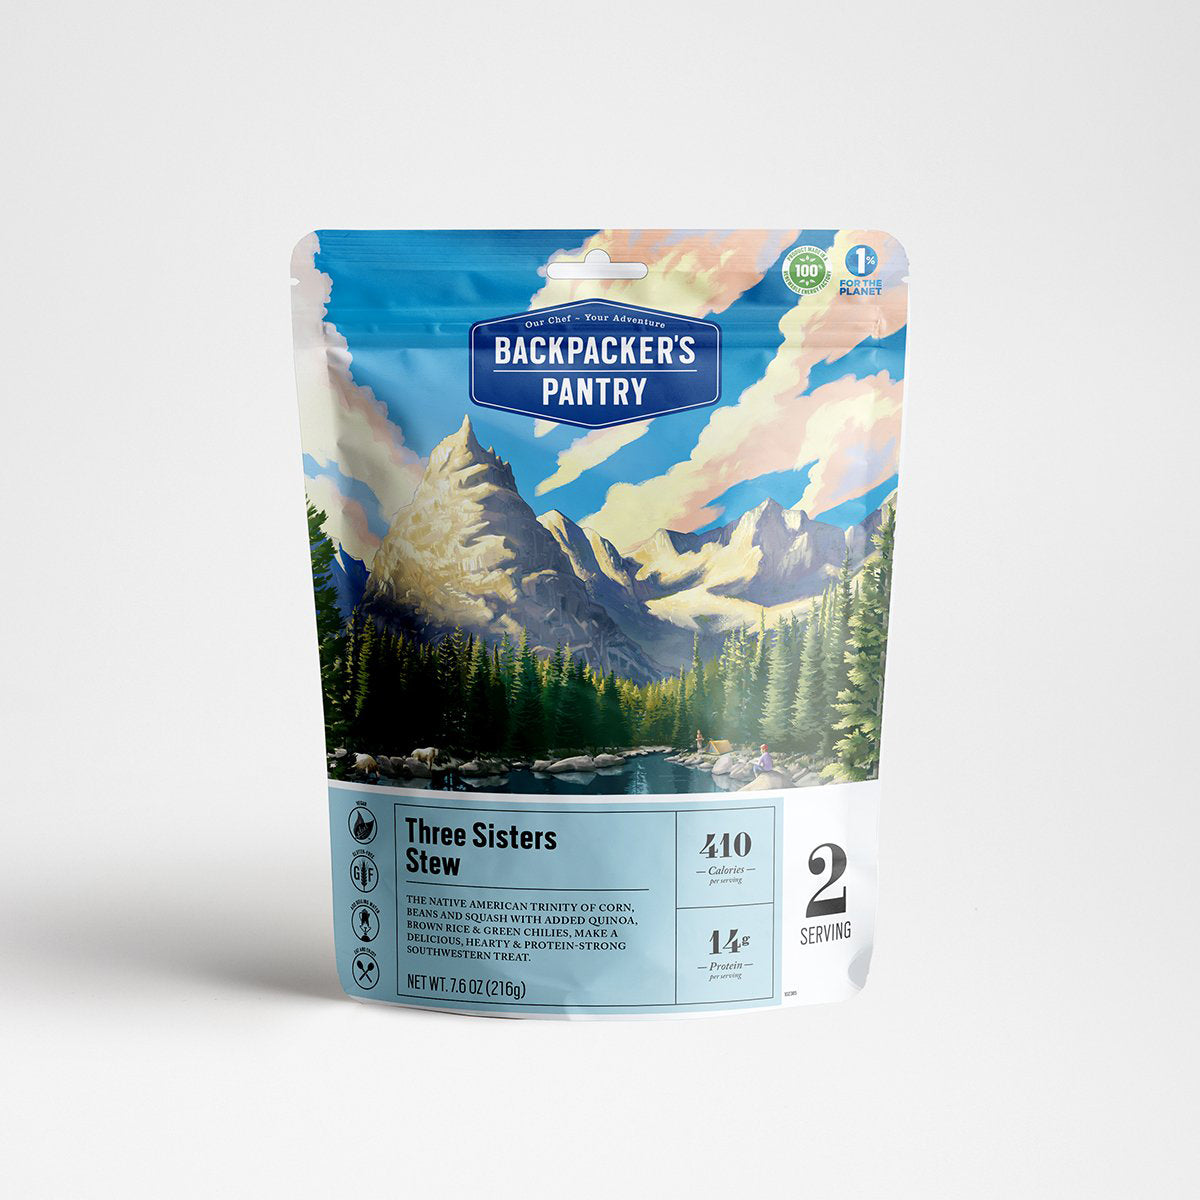 A photo of Backpackers Pantry Three sisters stew packaging, the front of the package